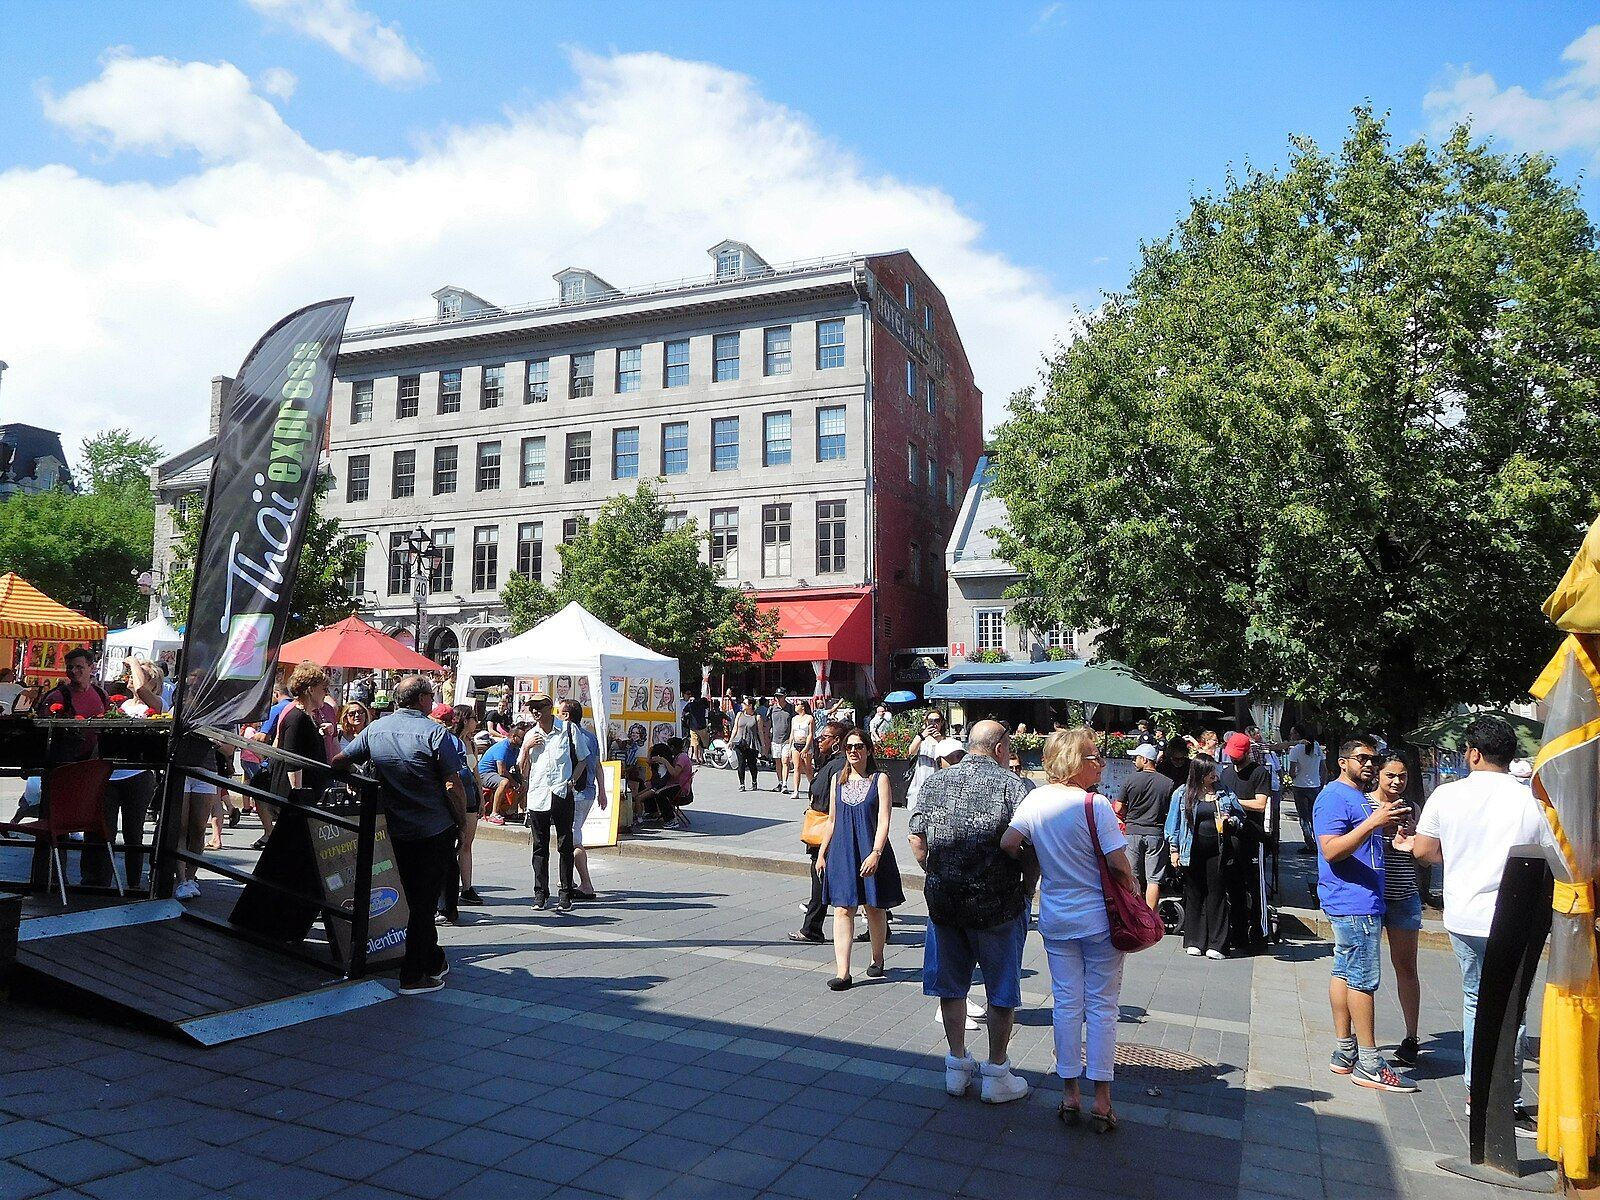 <p>In the heart of Montreal’s historic neighbourhood is <a href="https://www.mtl.org/en/what-to-do/heritage-and-architecture/place-jacques-cartier-and-place-de-la-dauversiere">Place Jacques-Cartier</a>; built in the first part of the 19th century, it sits on an archeological site where people gathered for many years prior to the construction of this concrete square. A picturesque spot to meet up with friends, it's more of a crossing ground rather than a place to hang out, as the cost of anything in and around this Canadian tourist trap is double what you’ll pay anywhere else in the city. Snap some selfies, bring your own snack, and move on to see the other stunning sites in <a href="https://theculturetrip.com/north-america/canada/articles/the-top-10-things-to-do-and-see-in-old-montreal/">Old Montreal</a>. </p>